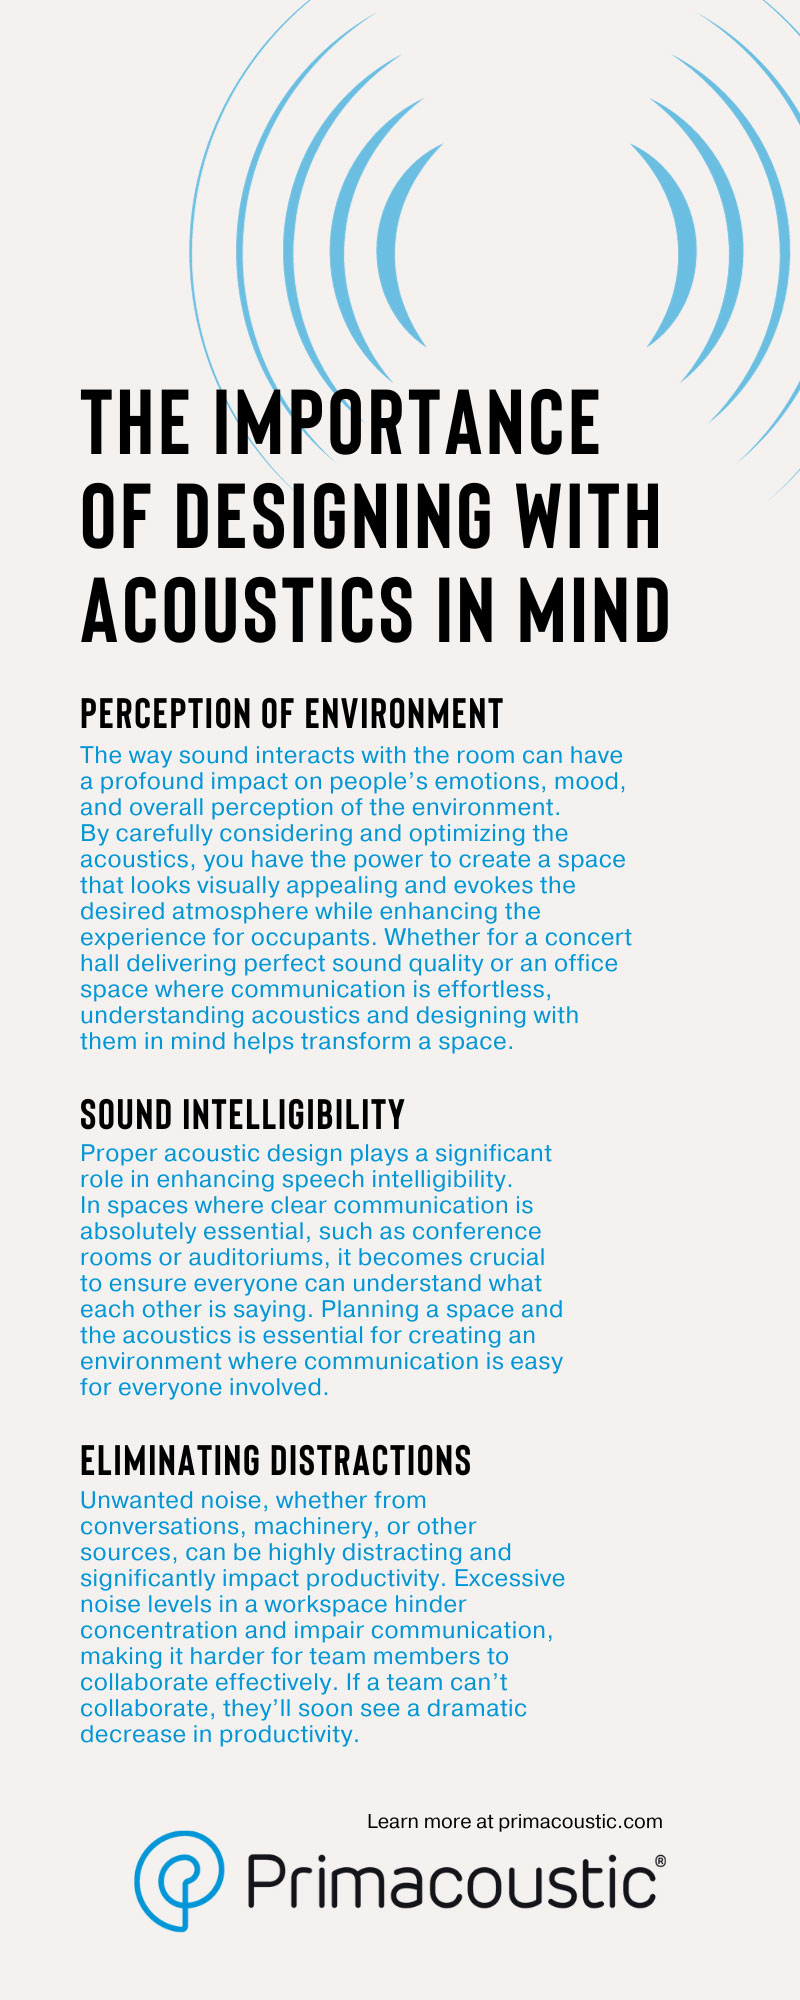 The Importance of Designing With Acoustics in Mind